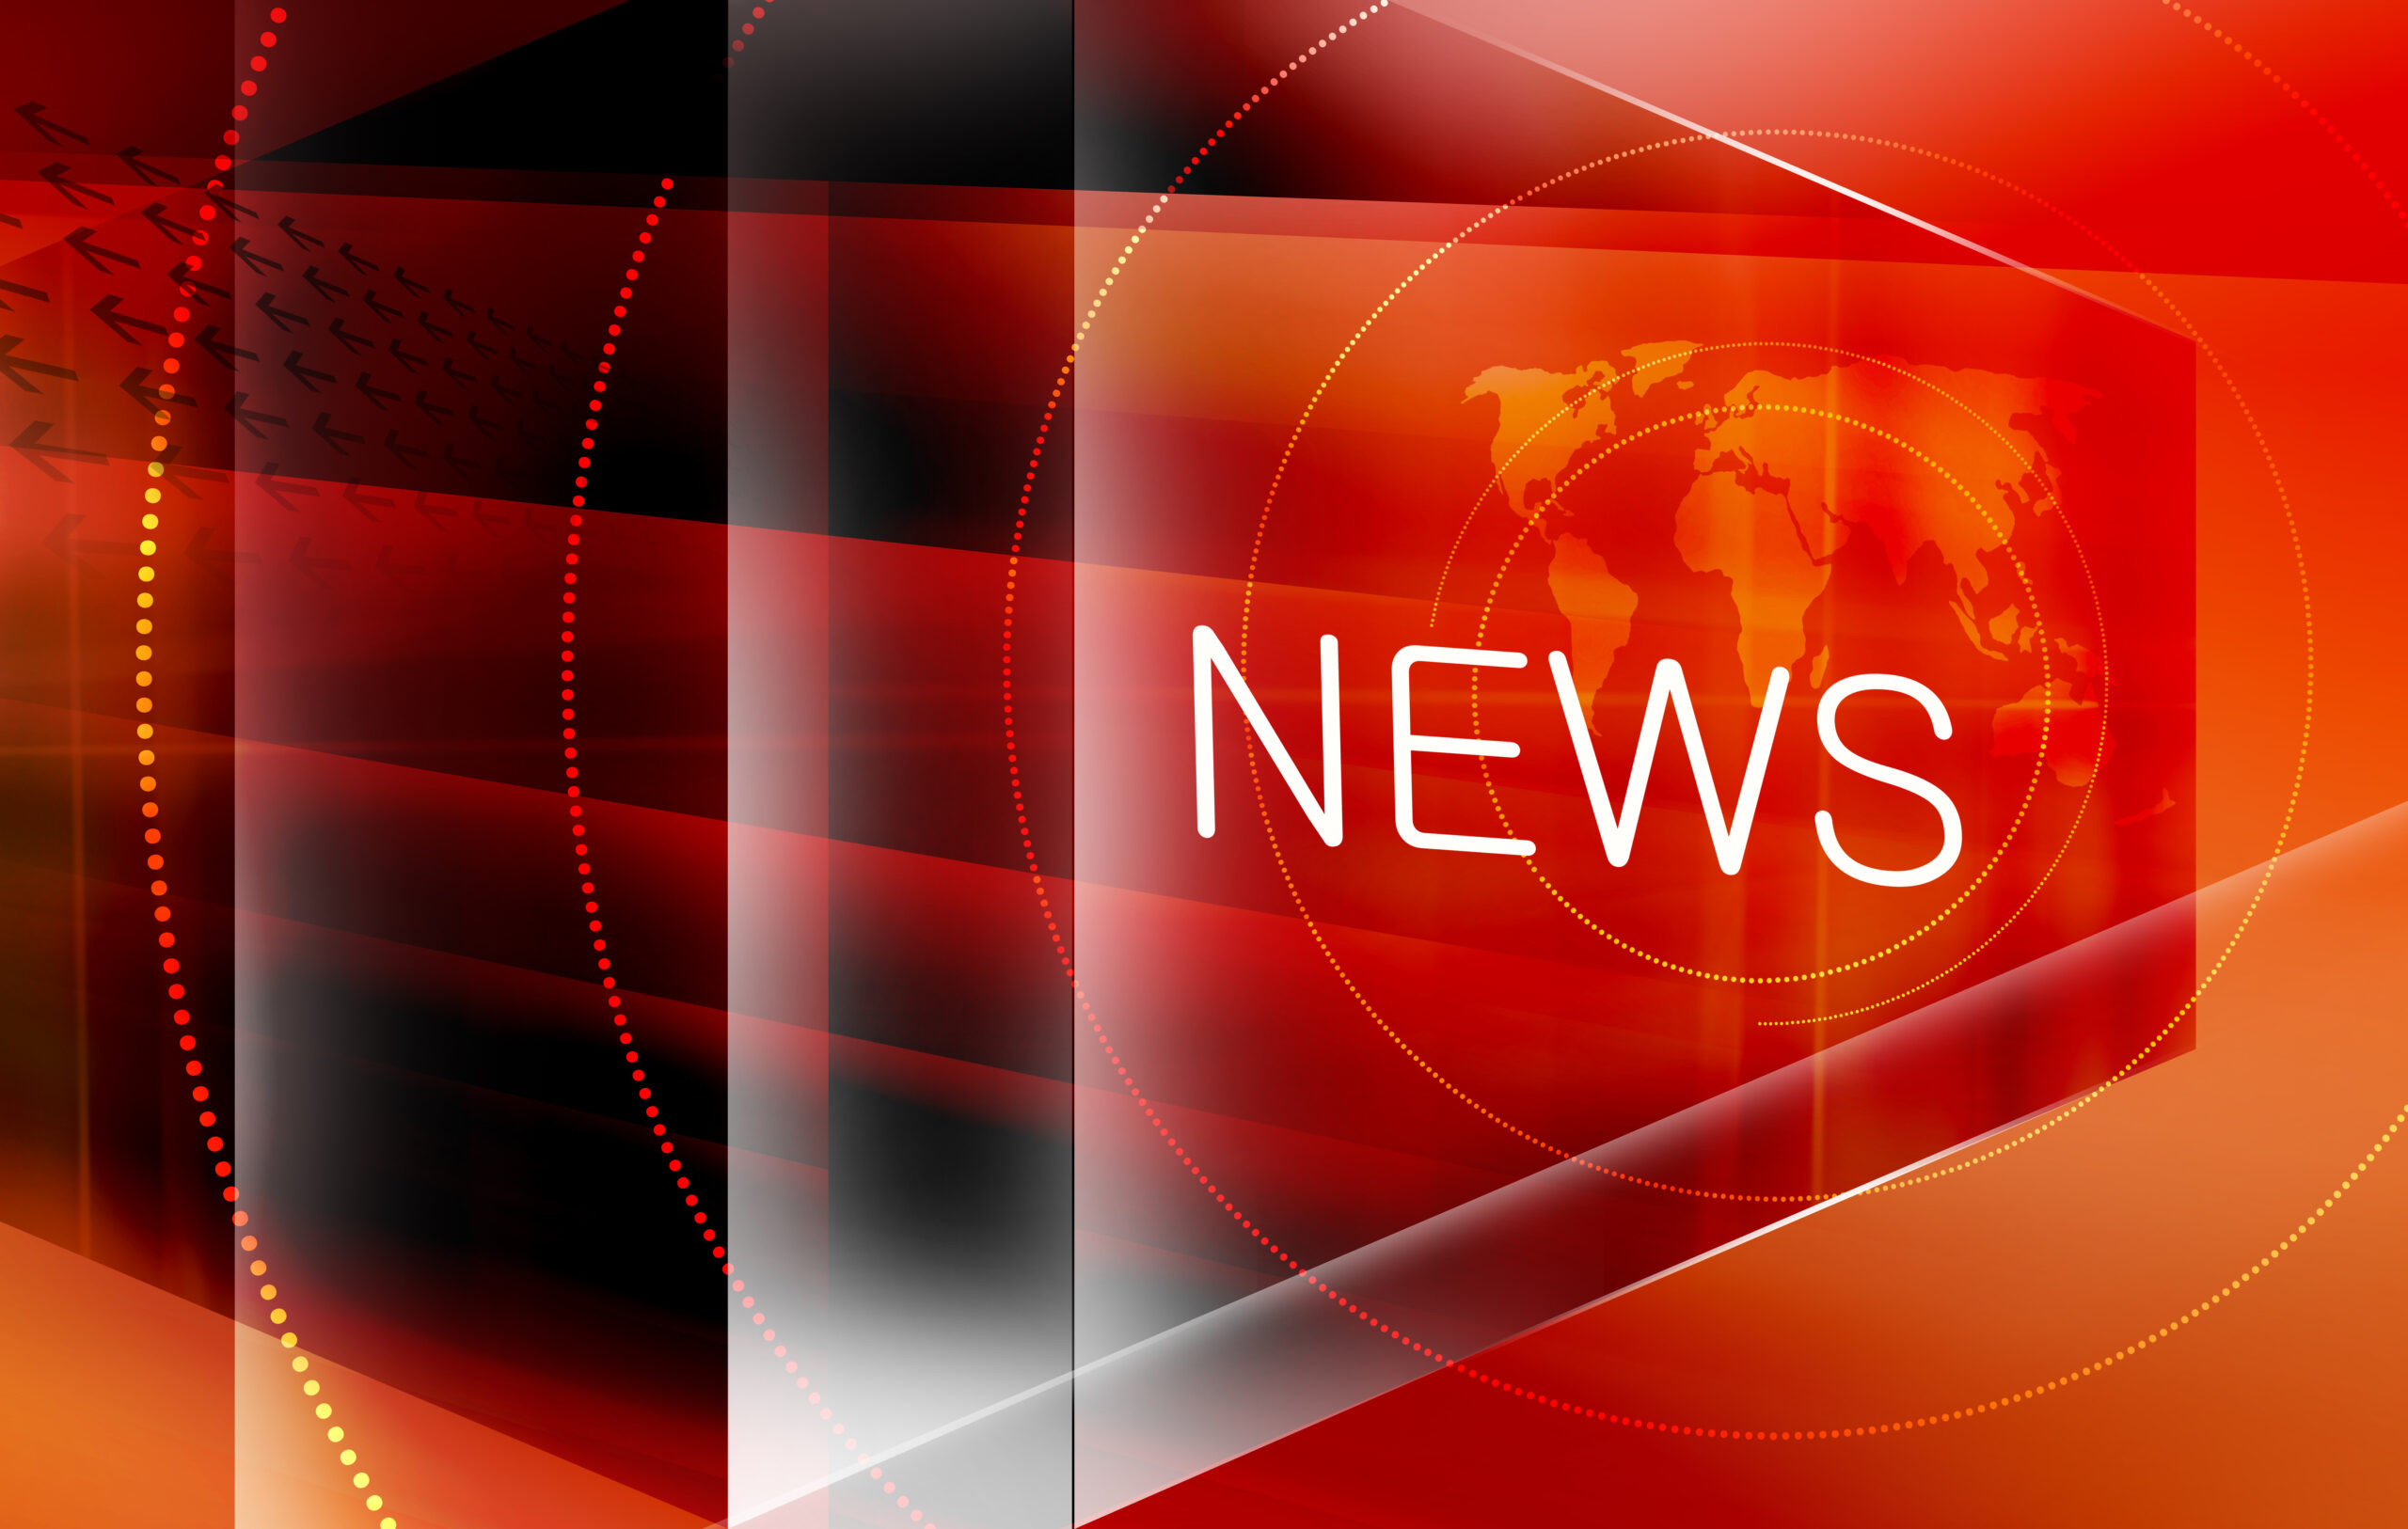 Graphical world news background with arrows and news text, a 3d illustration